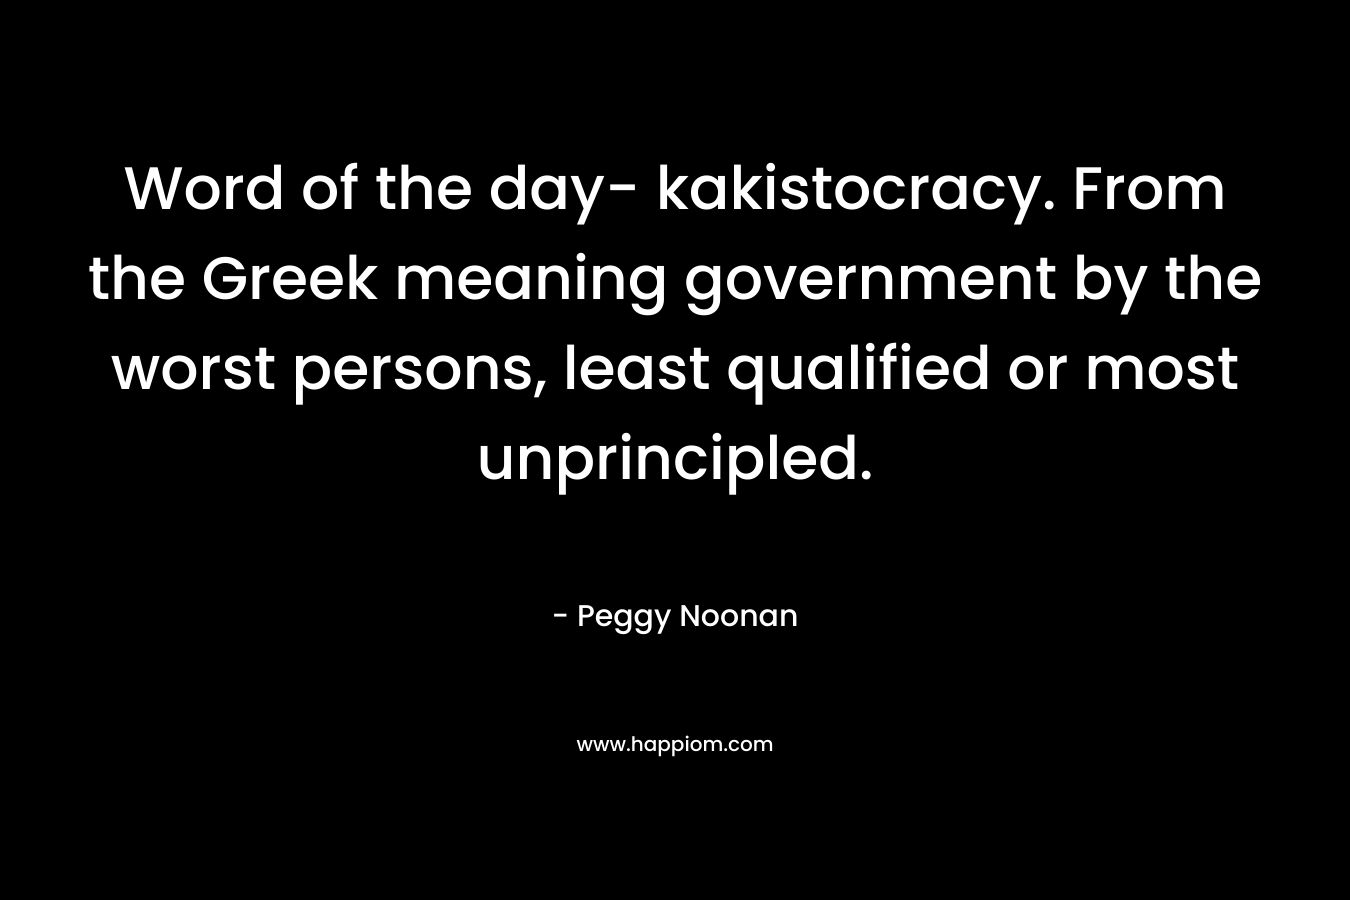 Word of the day- kakistocracy. From the Greek meaning government by the worst persons, least qualified or most unprincipled.